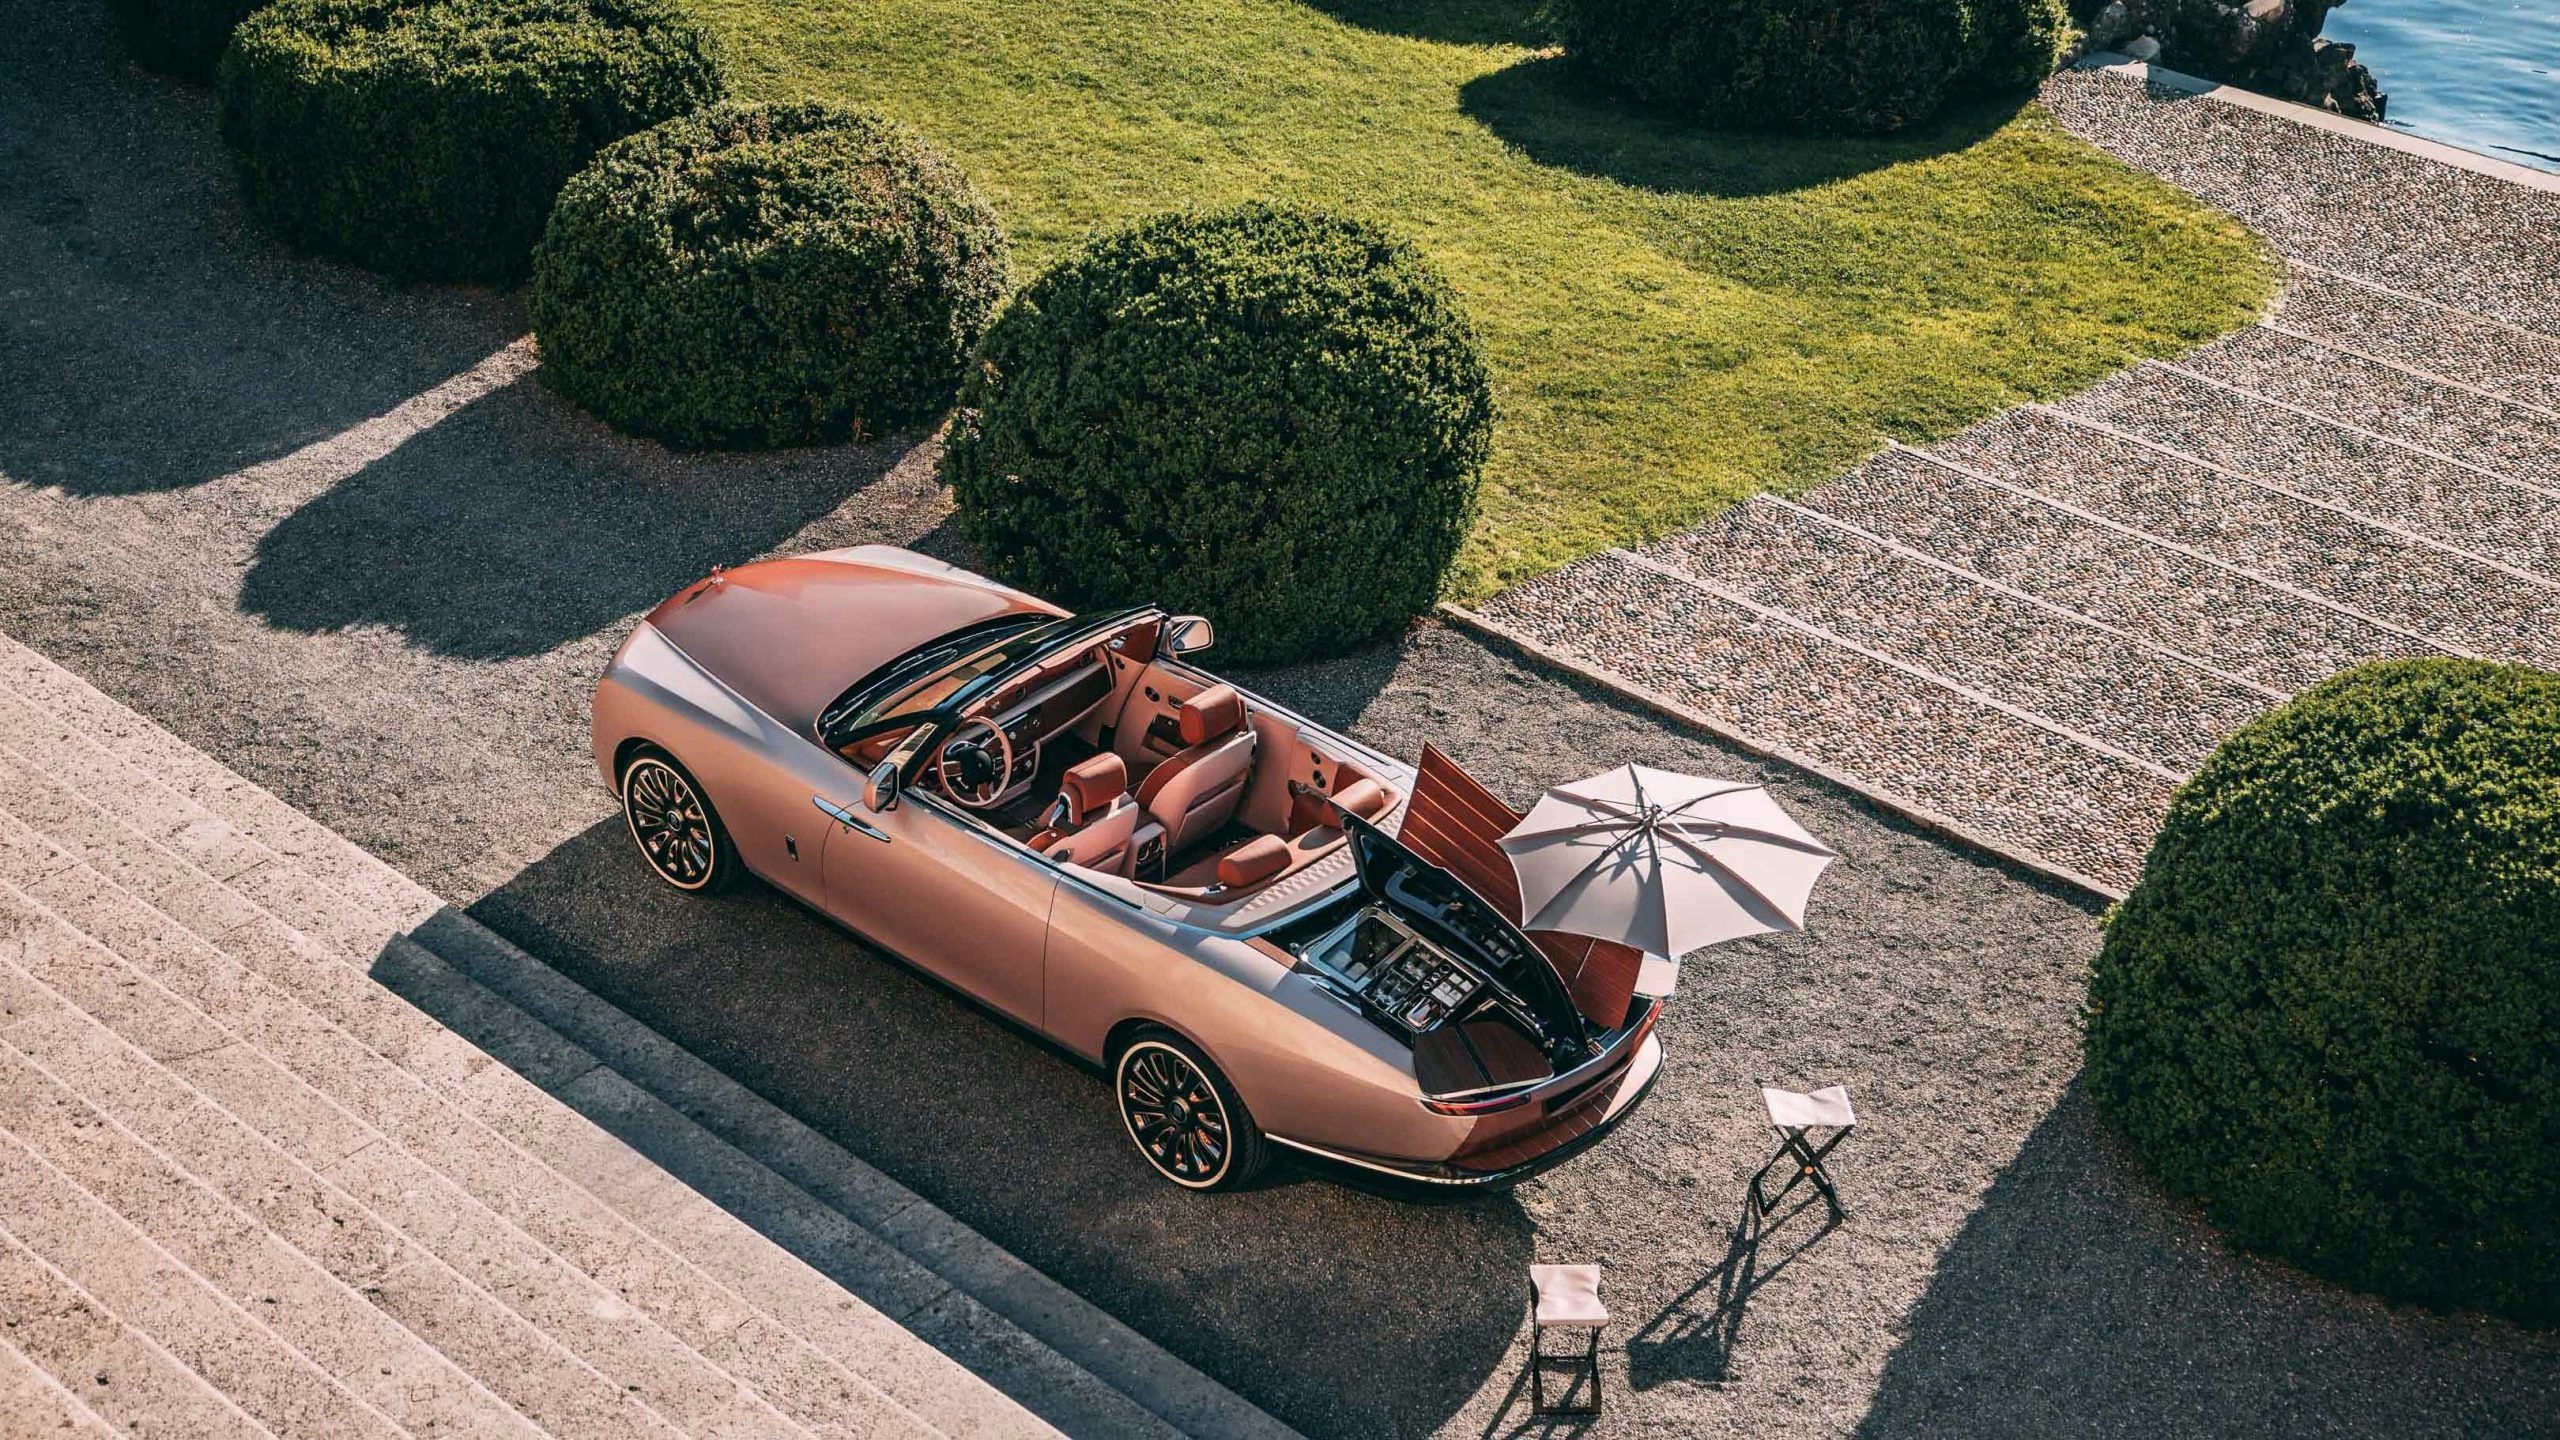 Omelets generate more value creation than cars and champagne. Why? Daniel Langer looks at how luxury undervalues itself — and what brands can do to realize their true potential. Photo: Rolls-Royce Motor Cars